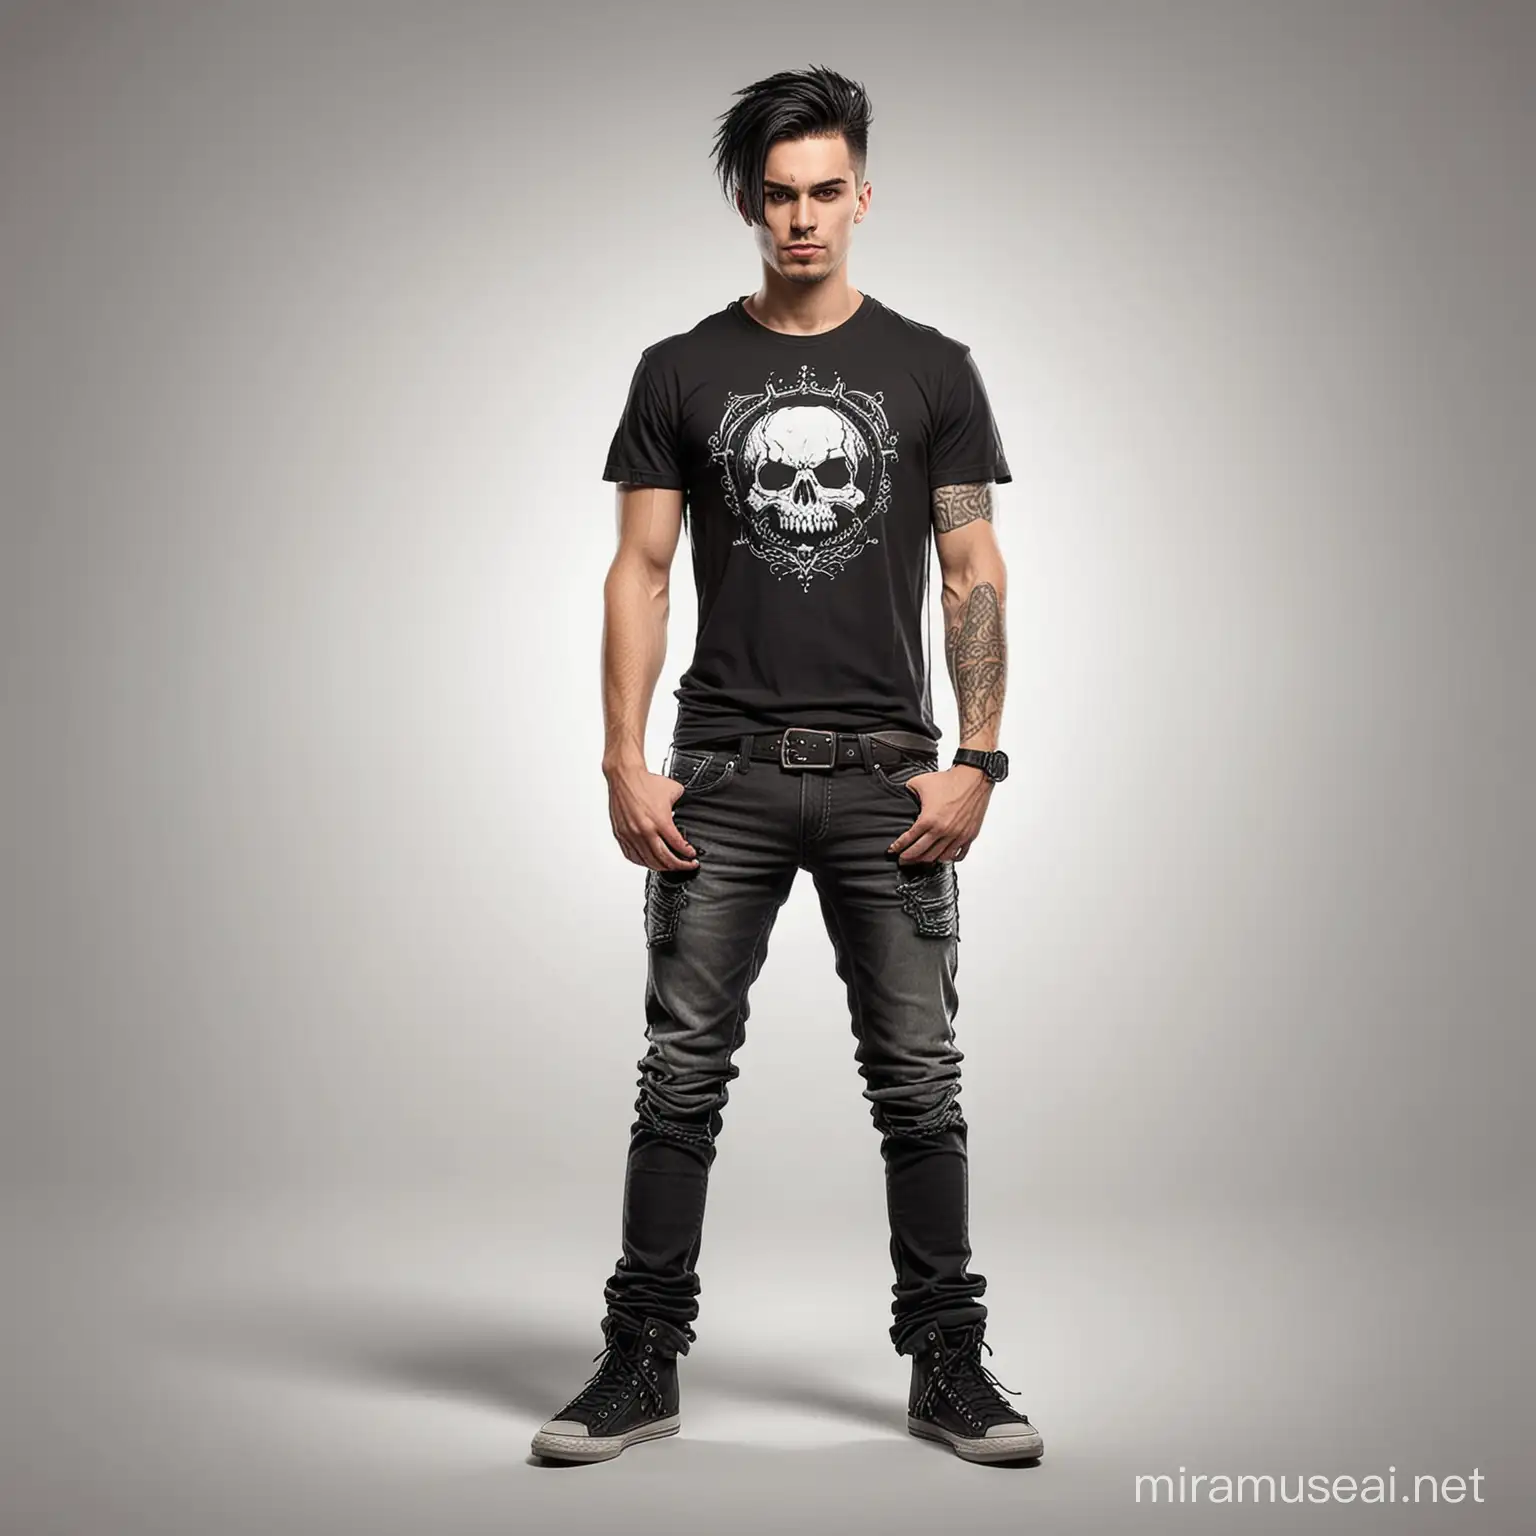 Gothic cartoon style man wearing black t-shirt and jeans white background